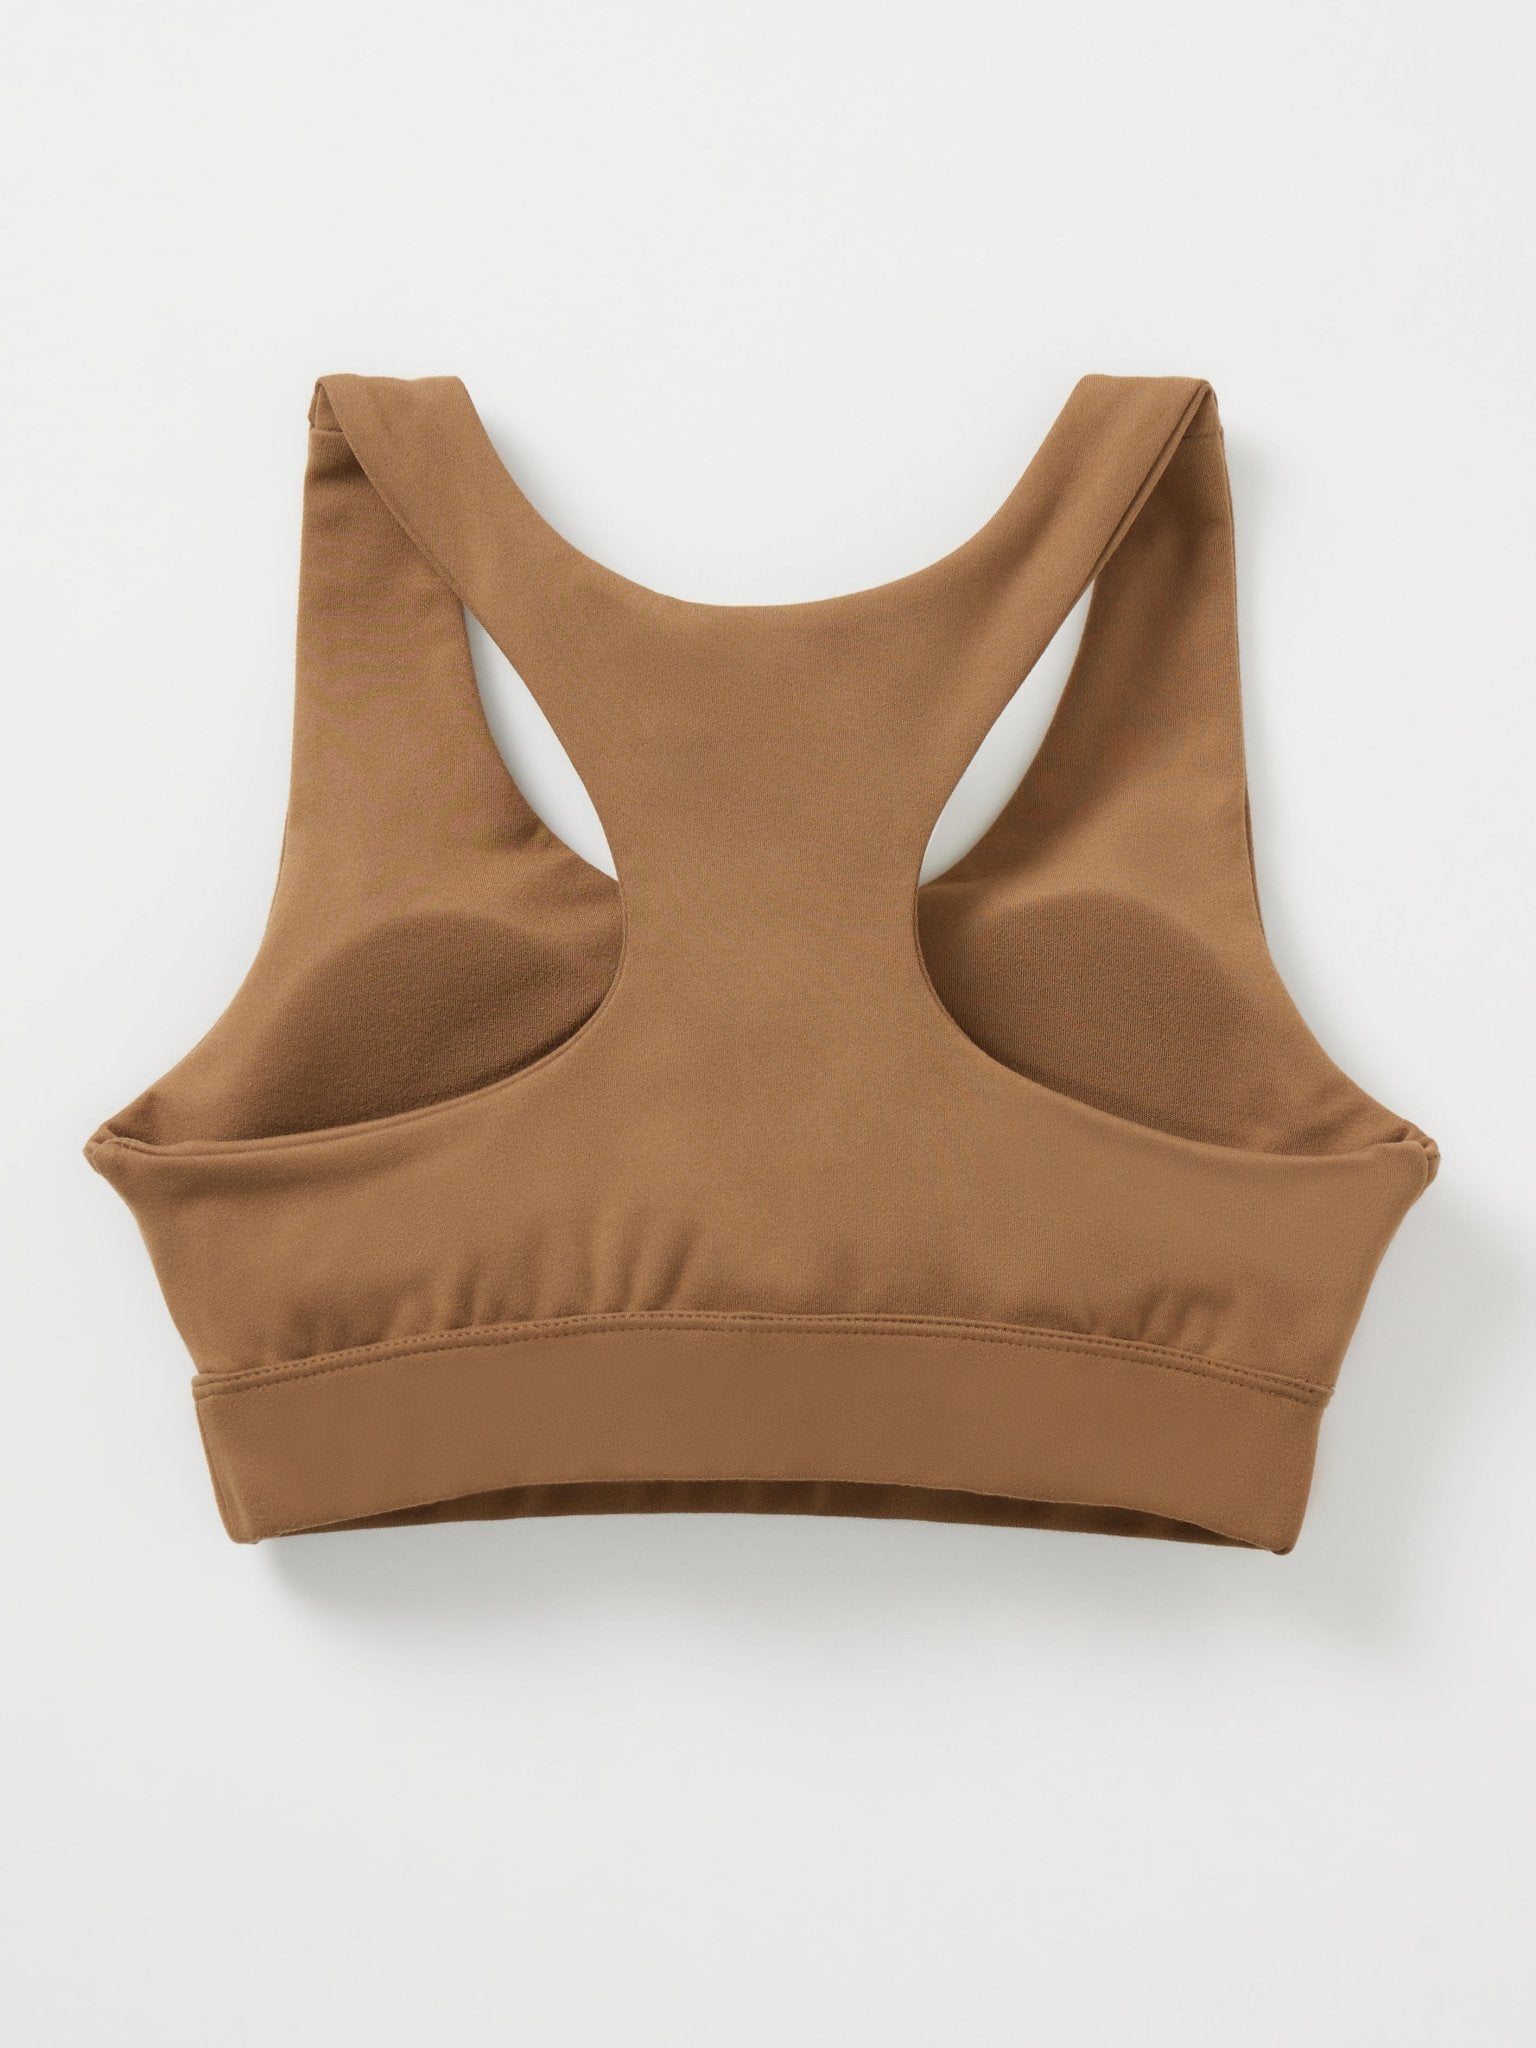 Buy Mountain Tan/Brown Comfy Sports Bra with Cups Online - Life & Jam